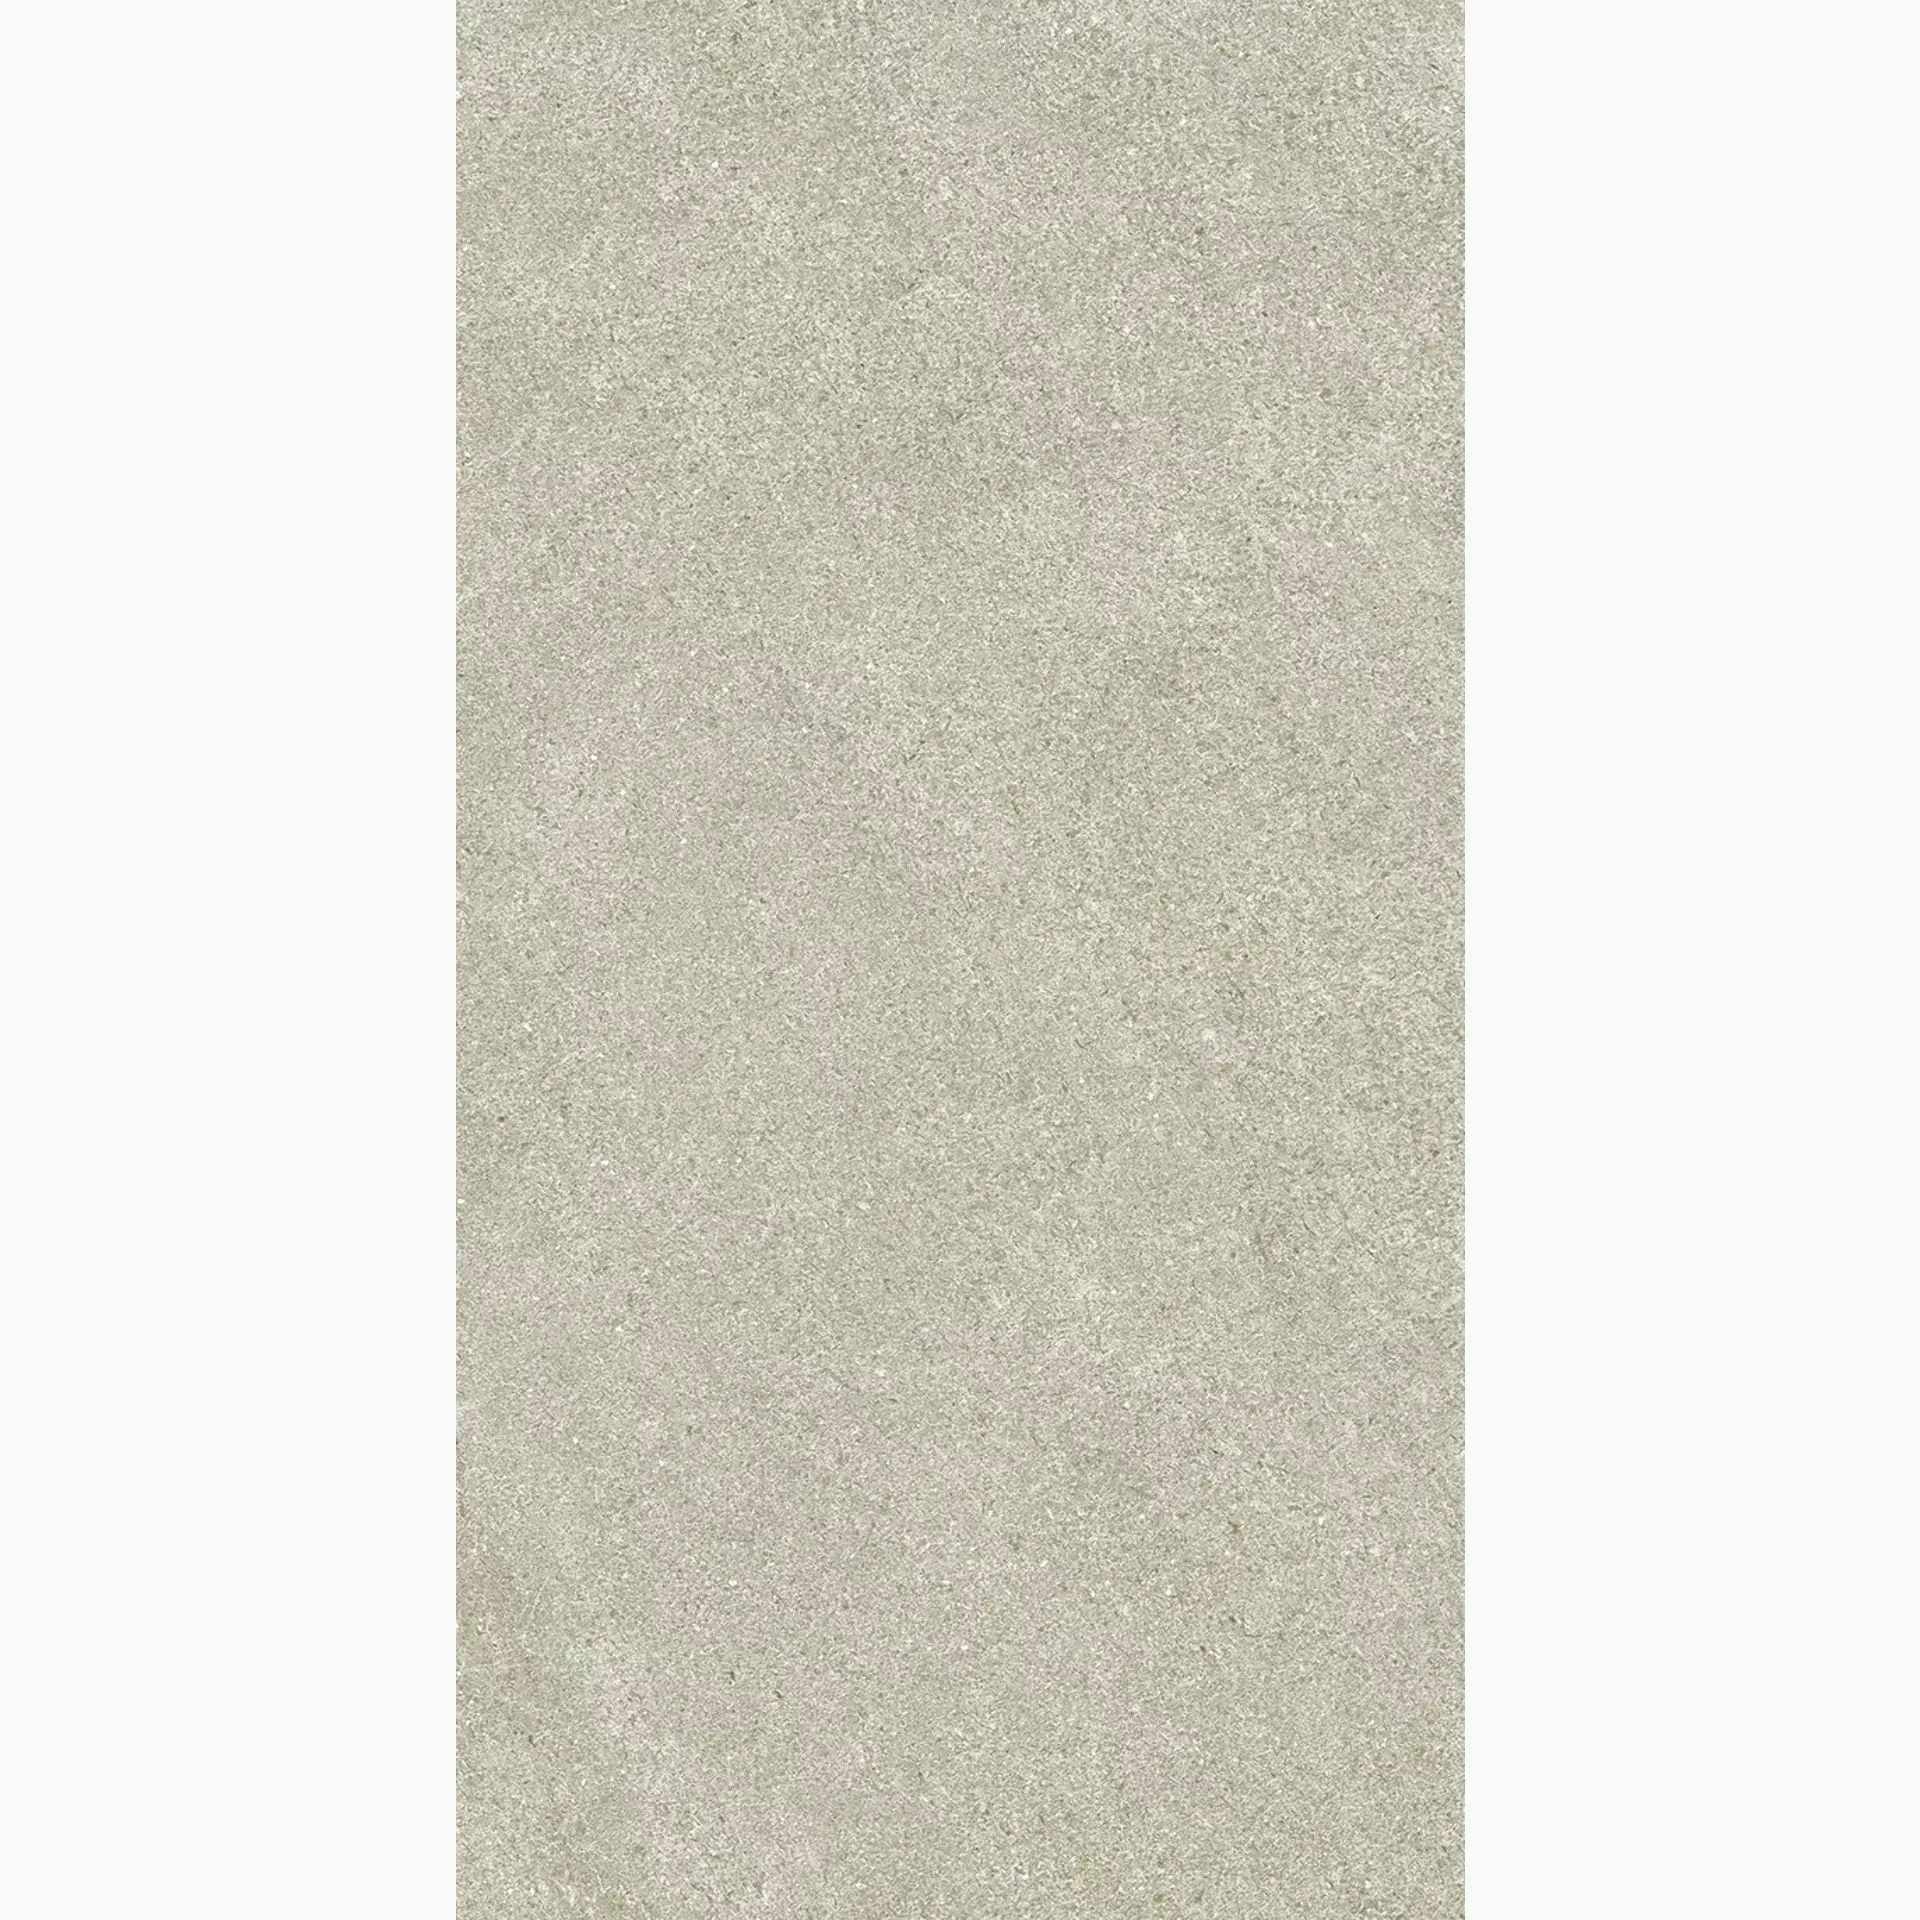 Margres Hybrid Light Grey Touch B2562HB3T 60x120cm rectified 11mm